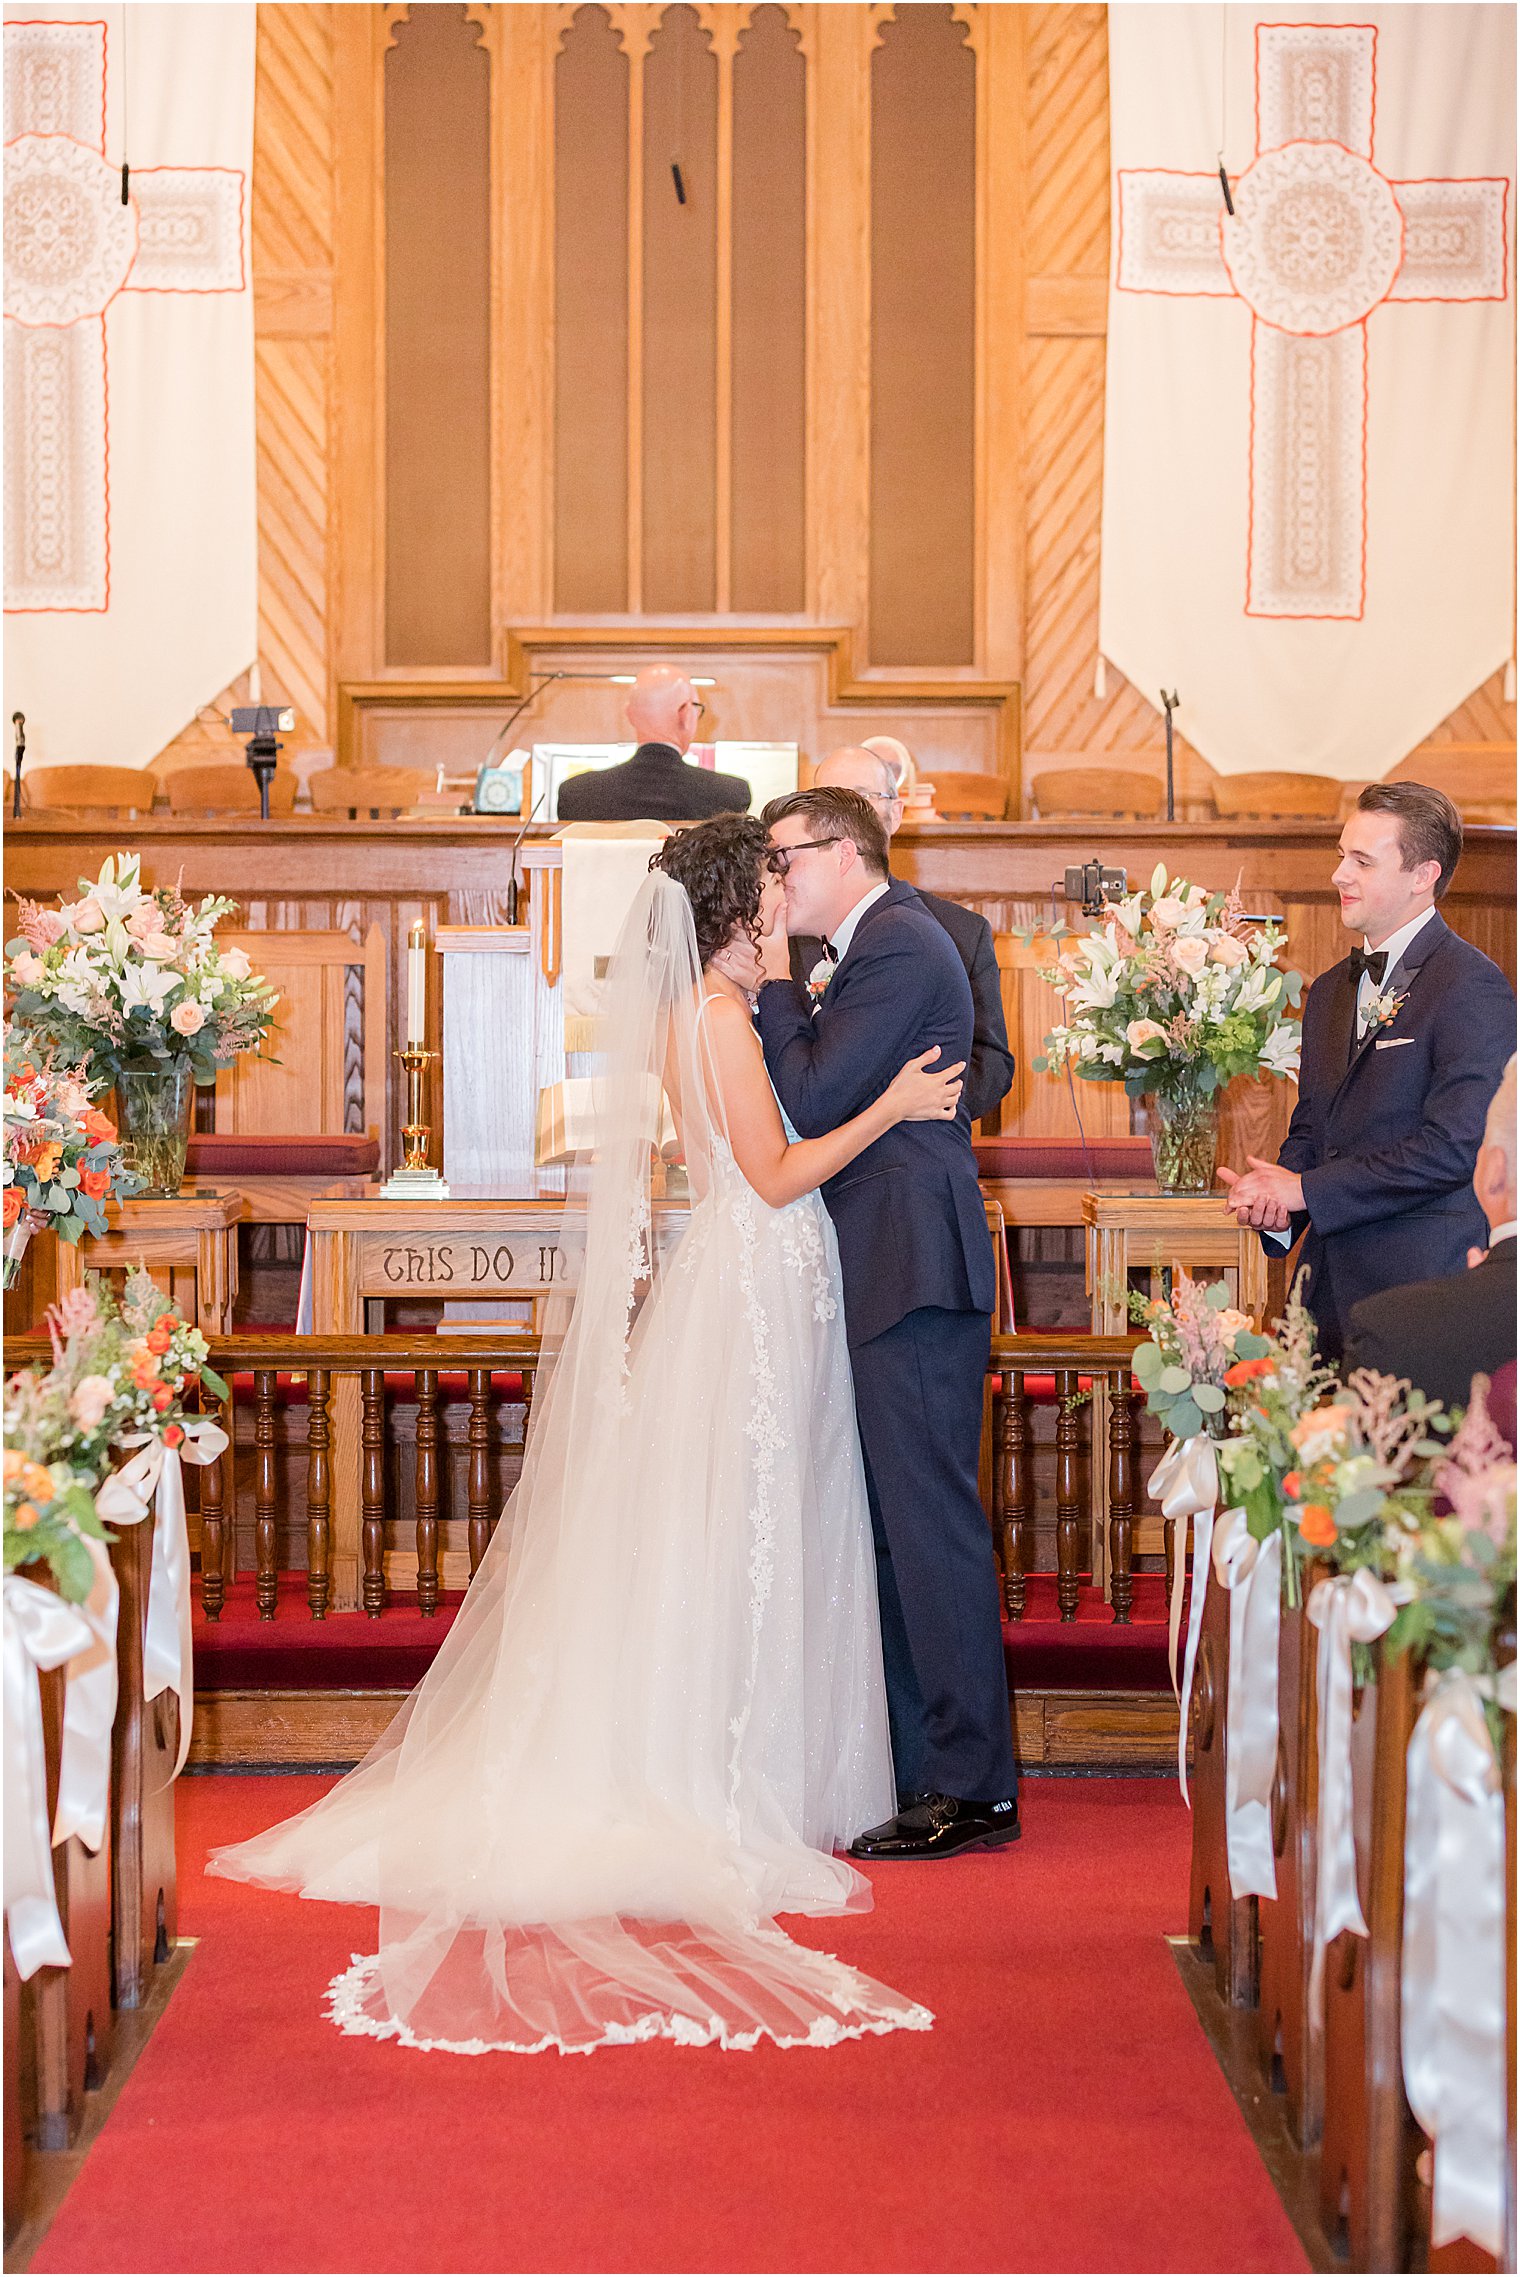 bride and groom kiss during wedding ceremony at St. Andrew's United Methodist Church